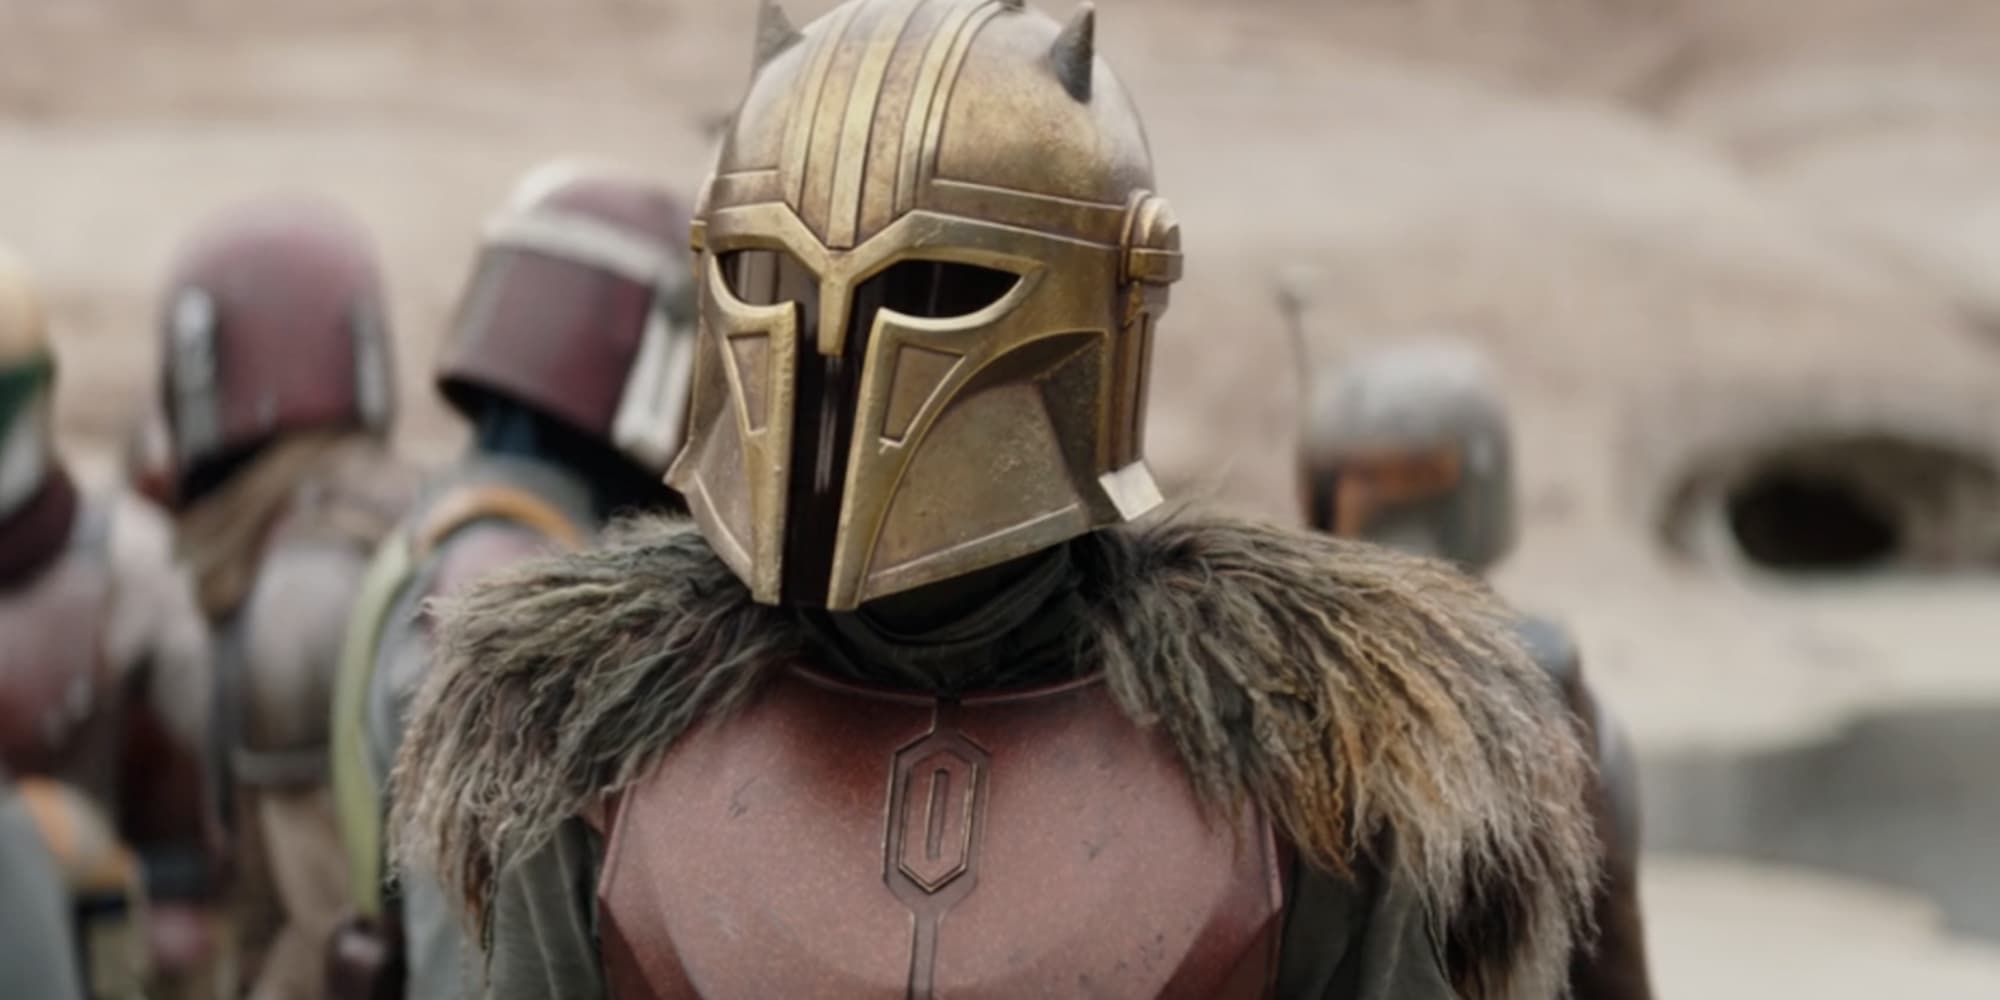 The Armorer in The Mandalorian